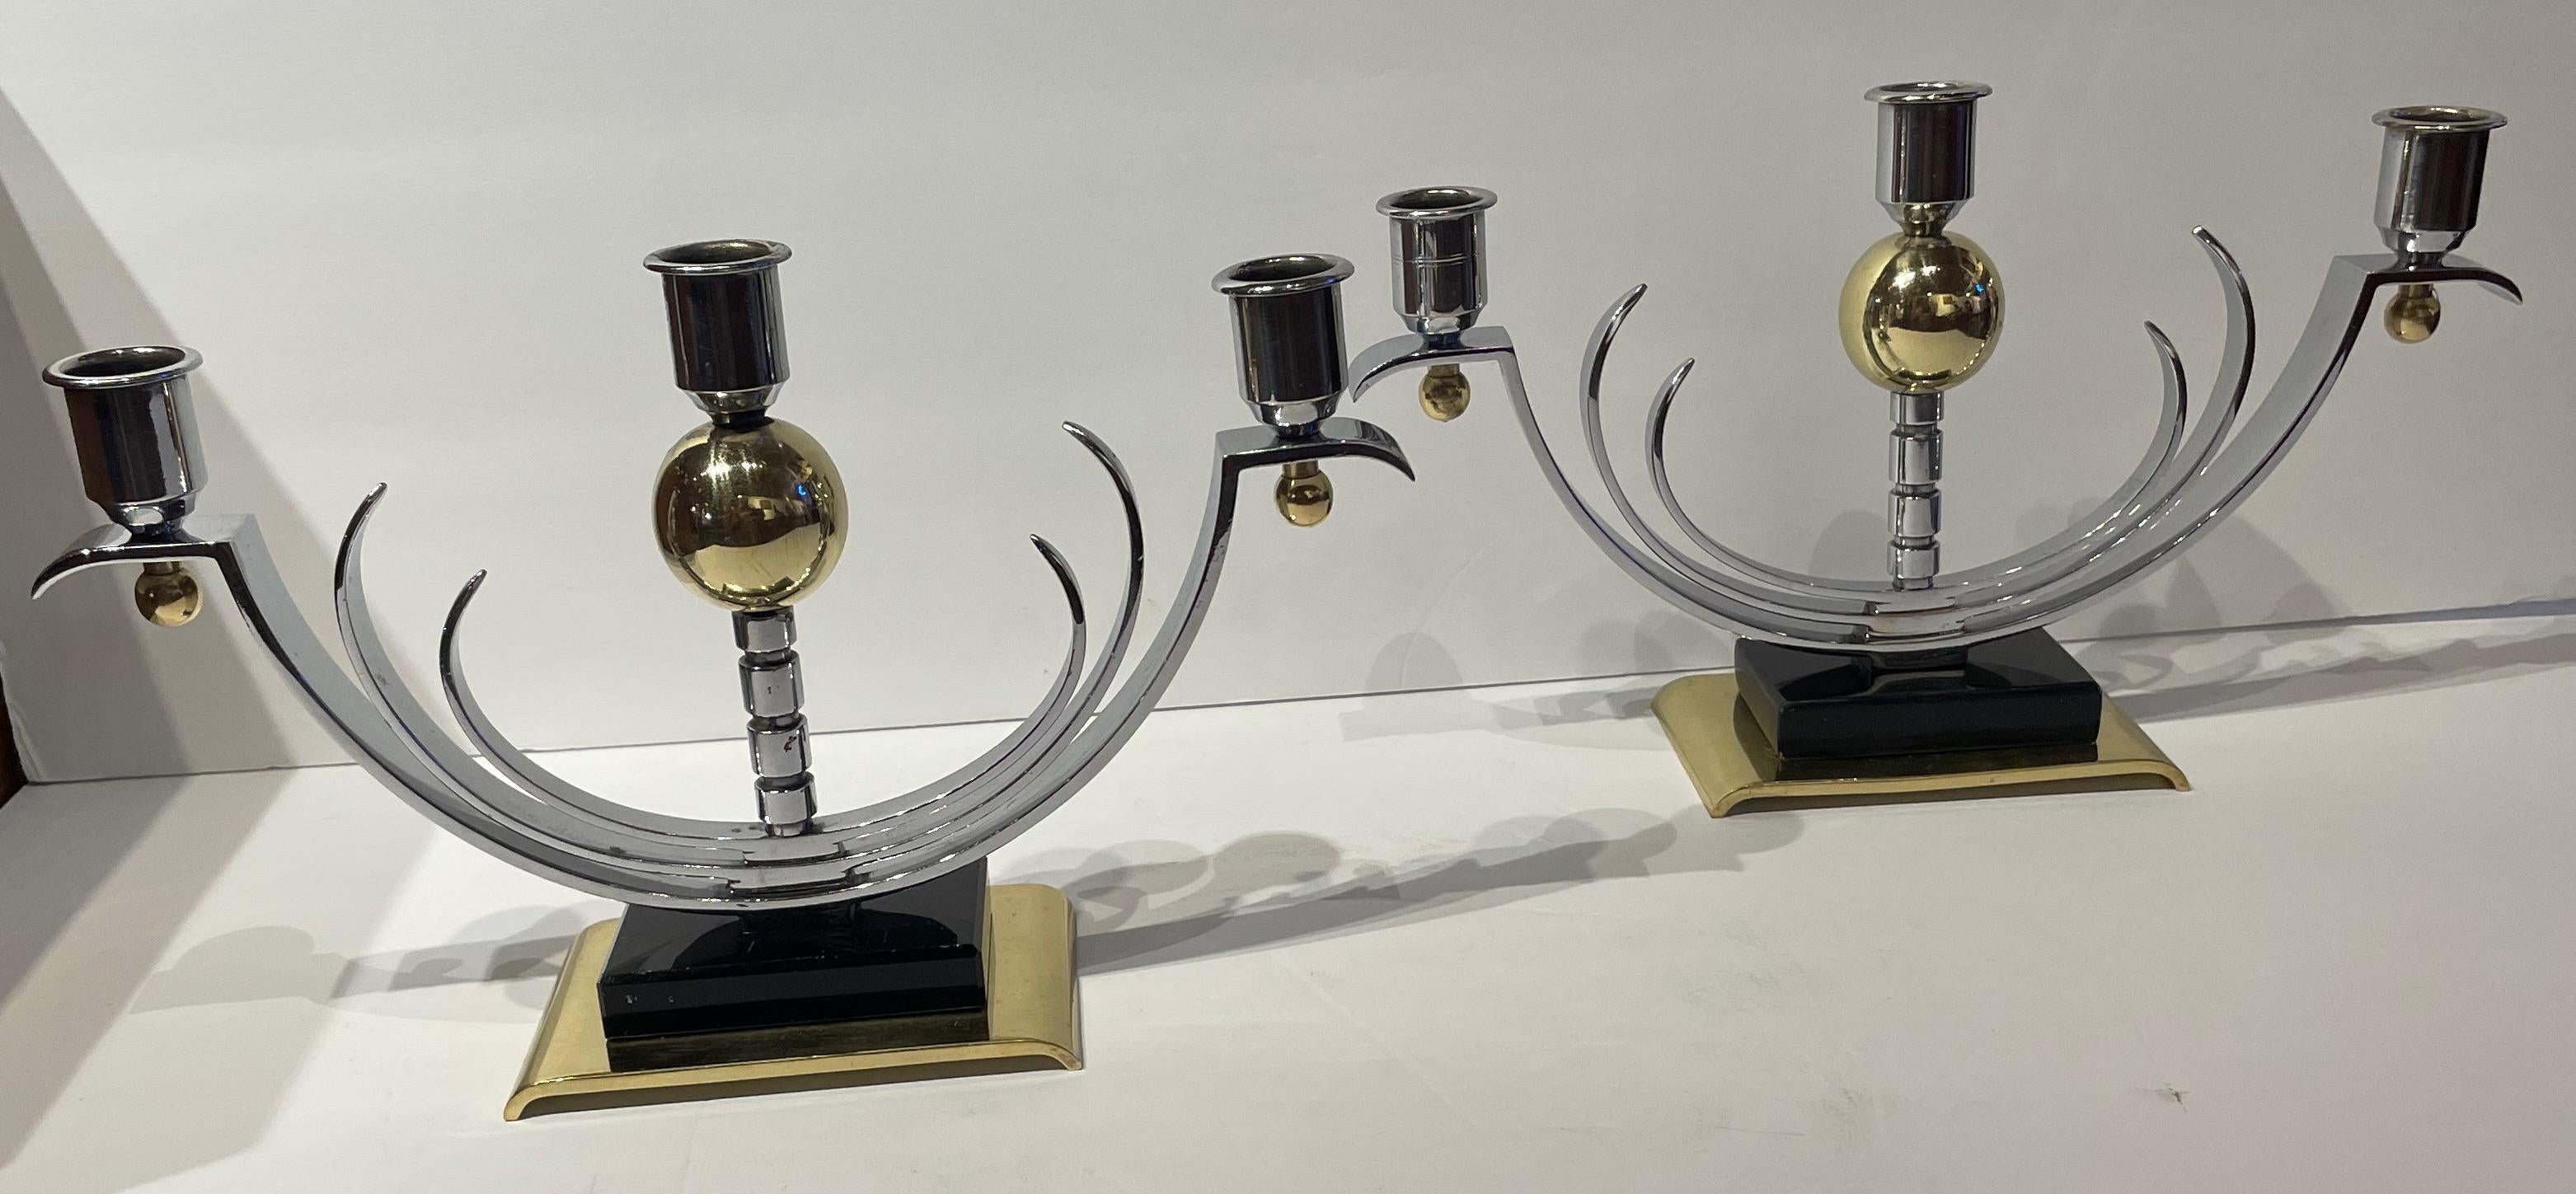 Art Deco Pair of Modernist candlesticks chrome brass and vitrolite. Rare and extremely high quality, all pieces are fitted and machined precisely. The European set most likely Austrian has a great sense of style and unusual shape. The Chrome and